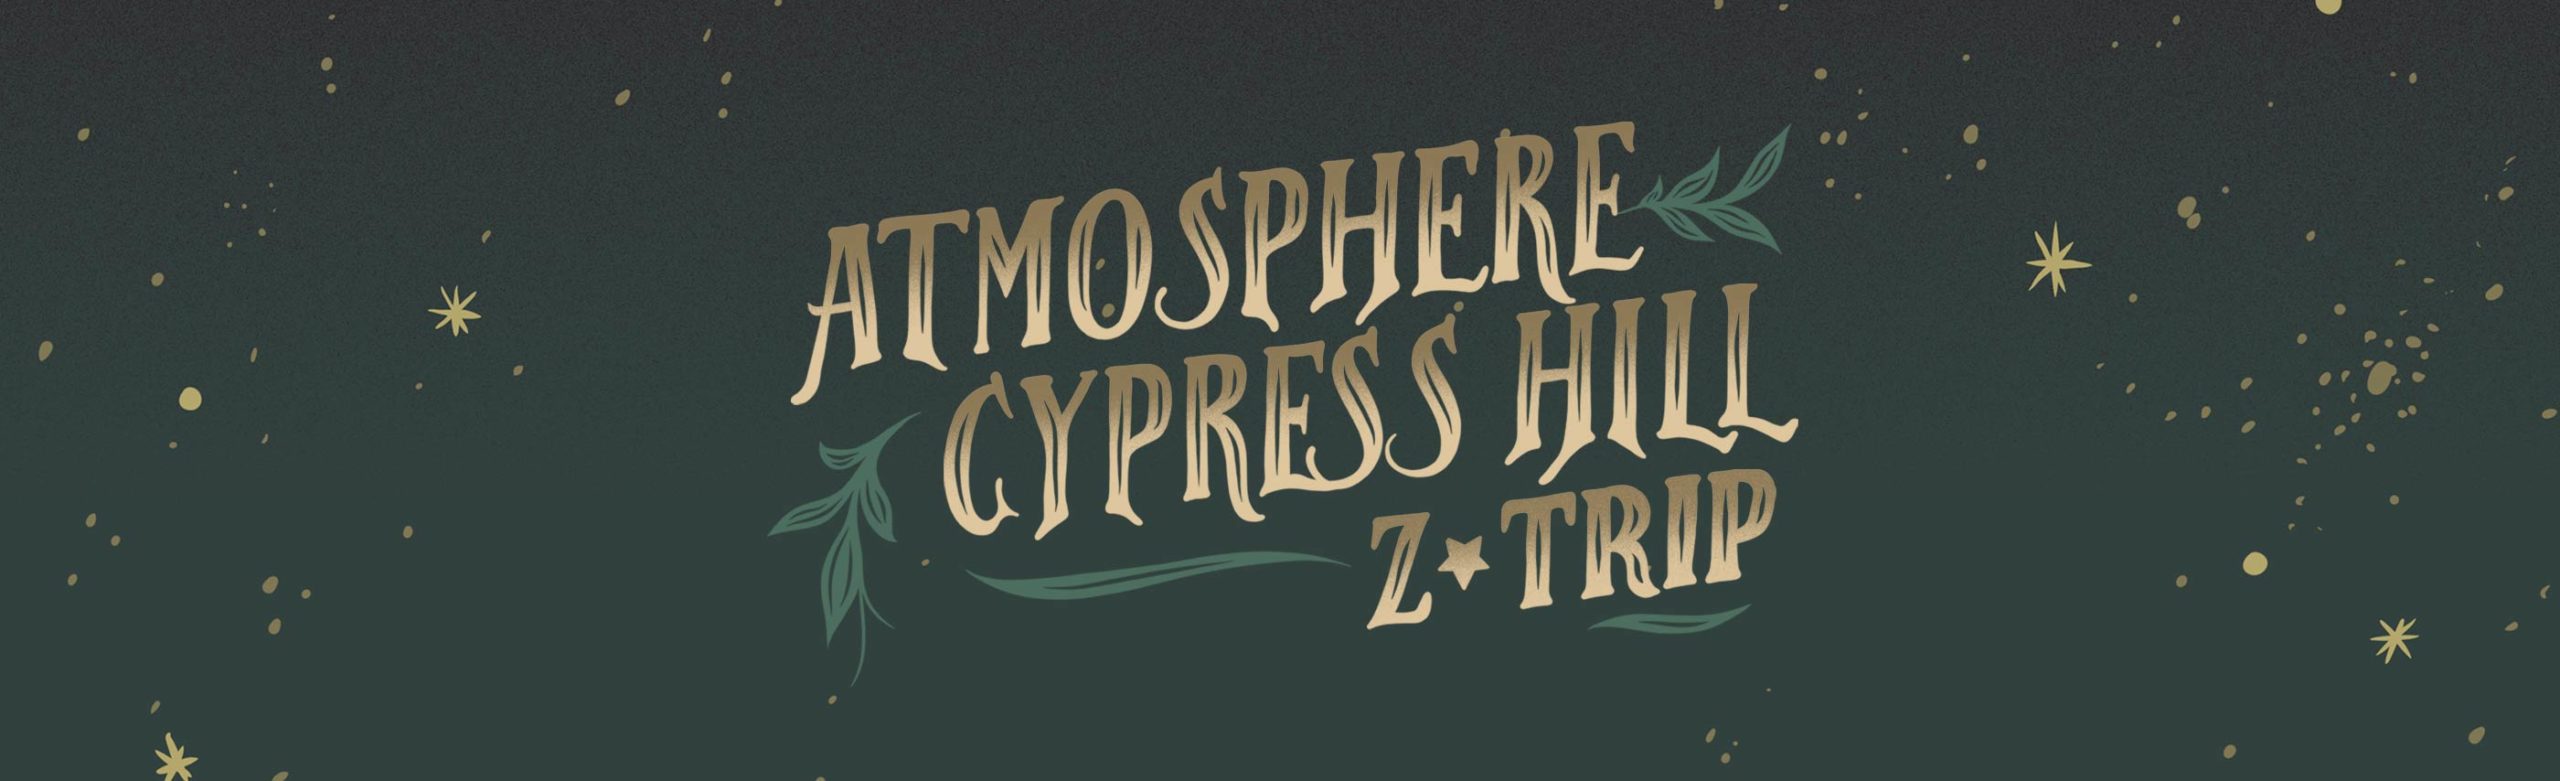 Atmosphere & Cypress Hill